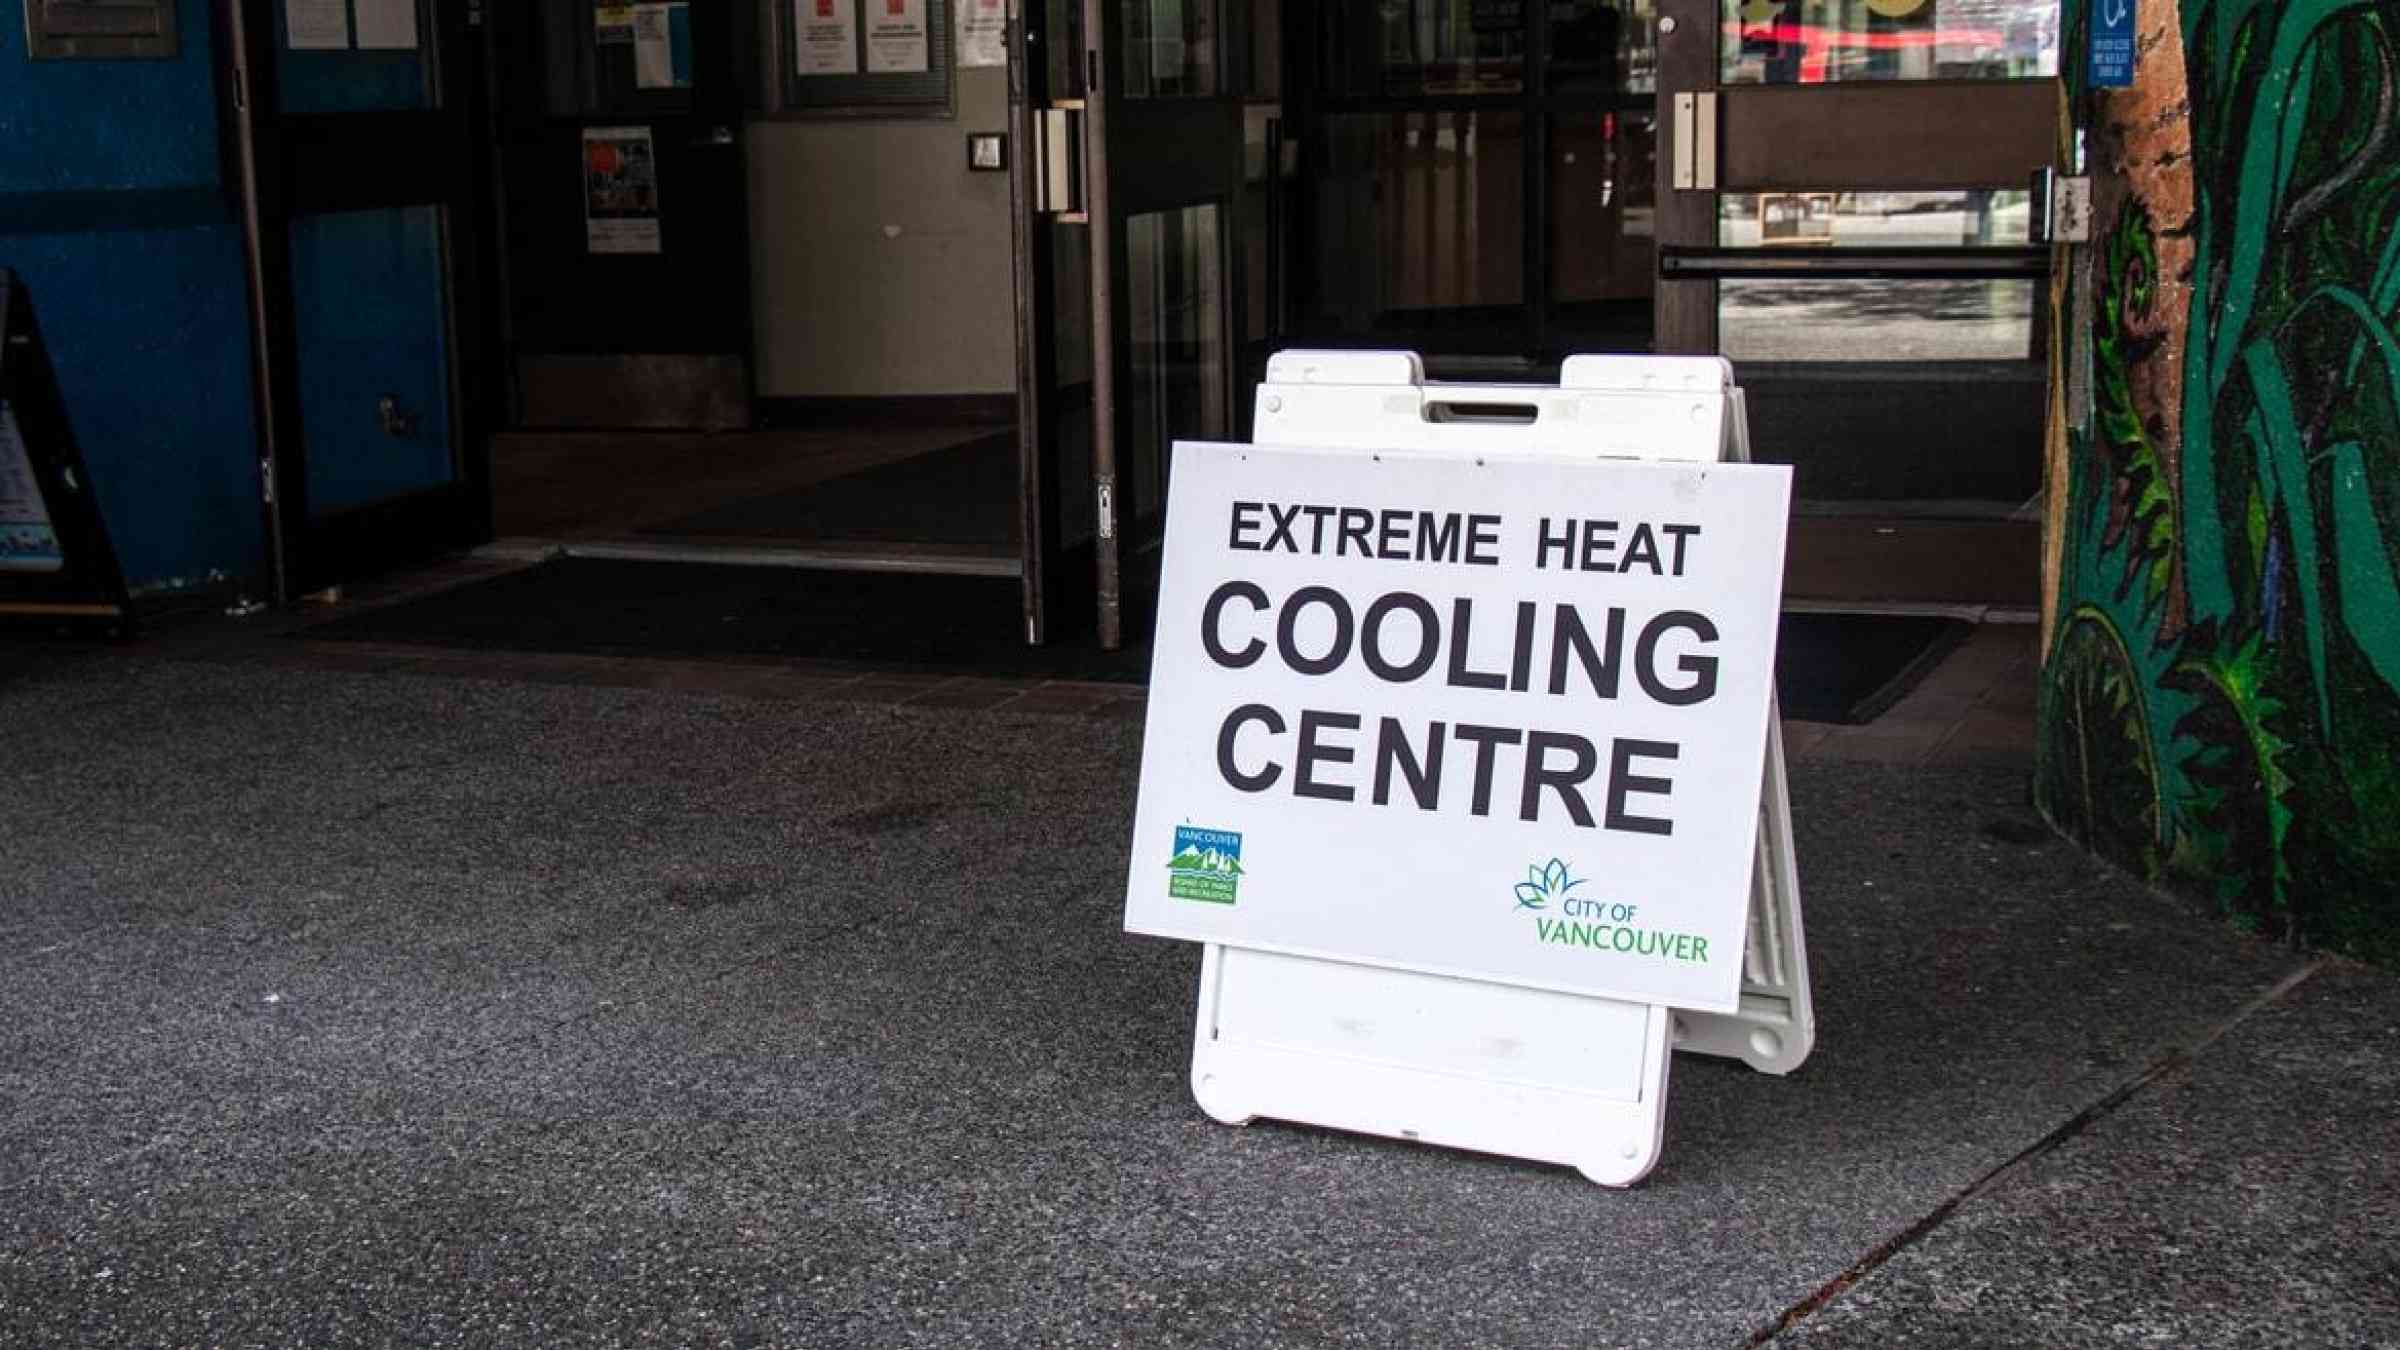 A cooling center sign in Vancouver, Canada amidst a heatwave